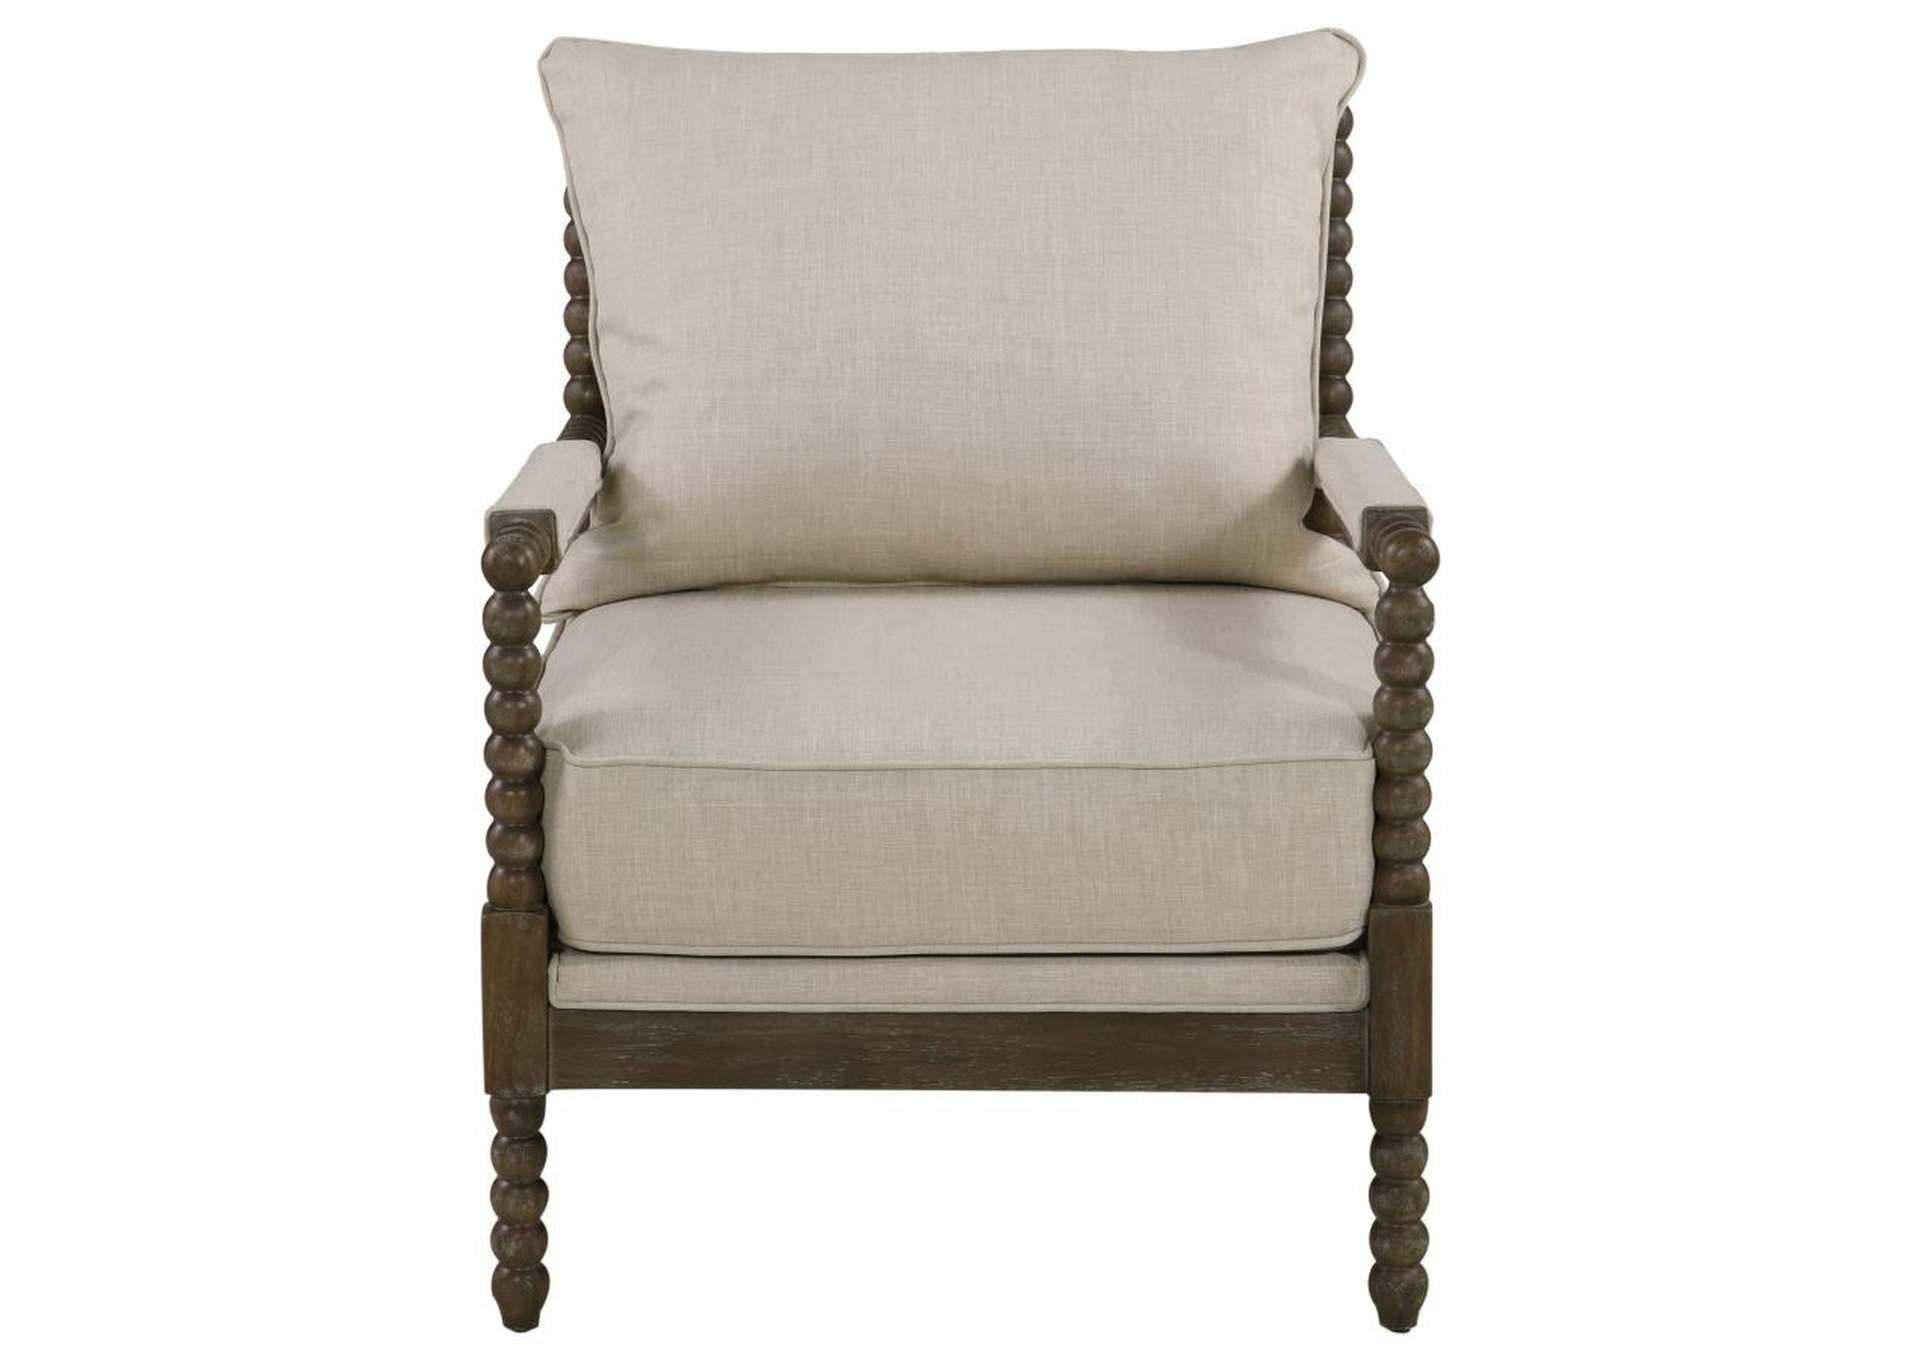 Blanchett Cushion Back Accent Chair Beige and Natural,Coaster Furniture